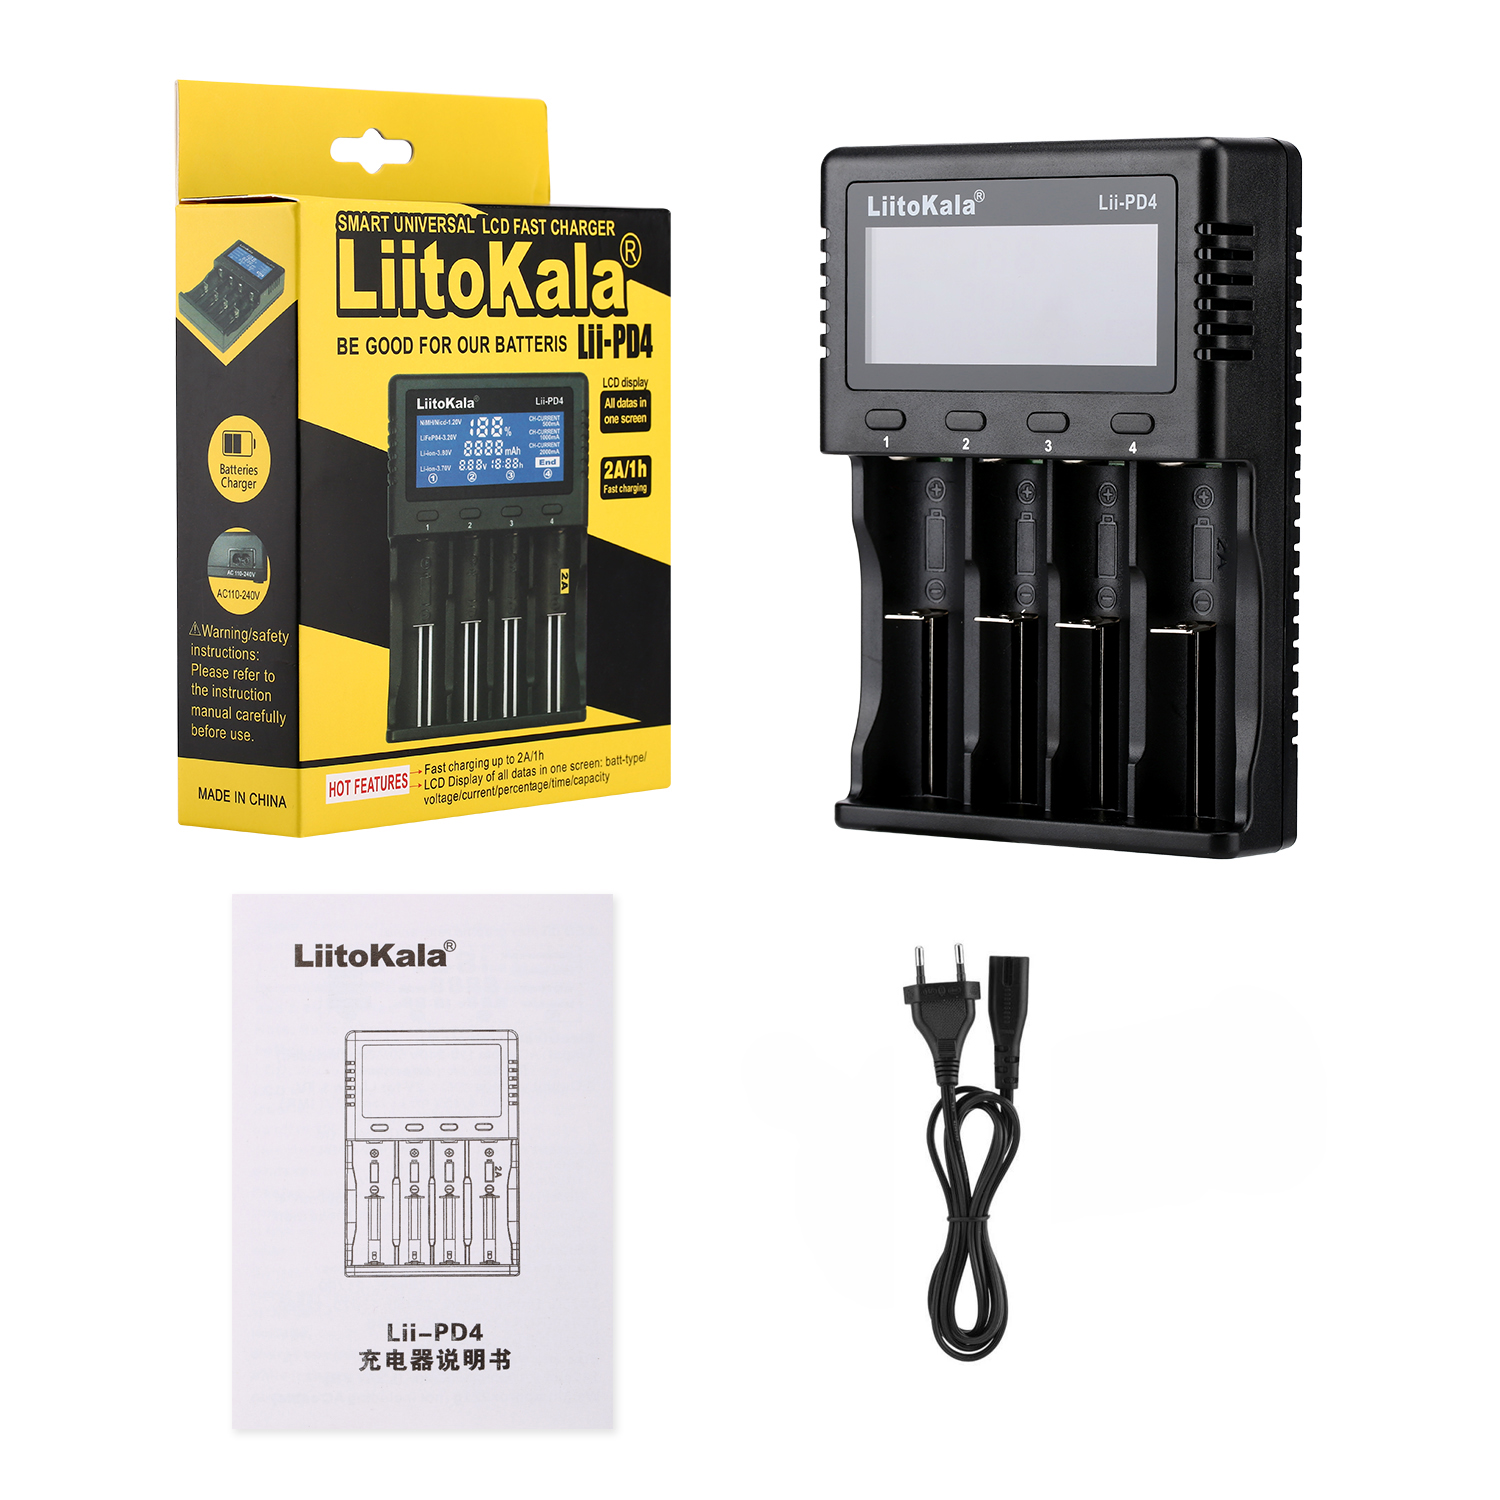 

Wholesale LiitoKala Lii-PD4 4 slot LCD Smart 18650 Battery Charger for 3.7V Li-ion 18650/18500/16340/26650/21700 /20700/18350/CR123A Rechargeable batteries